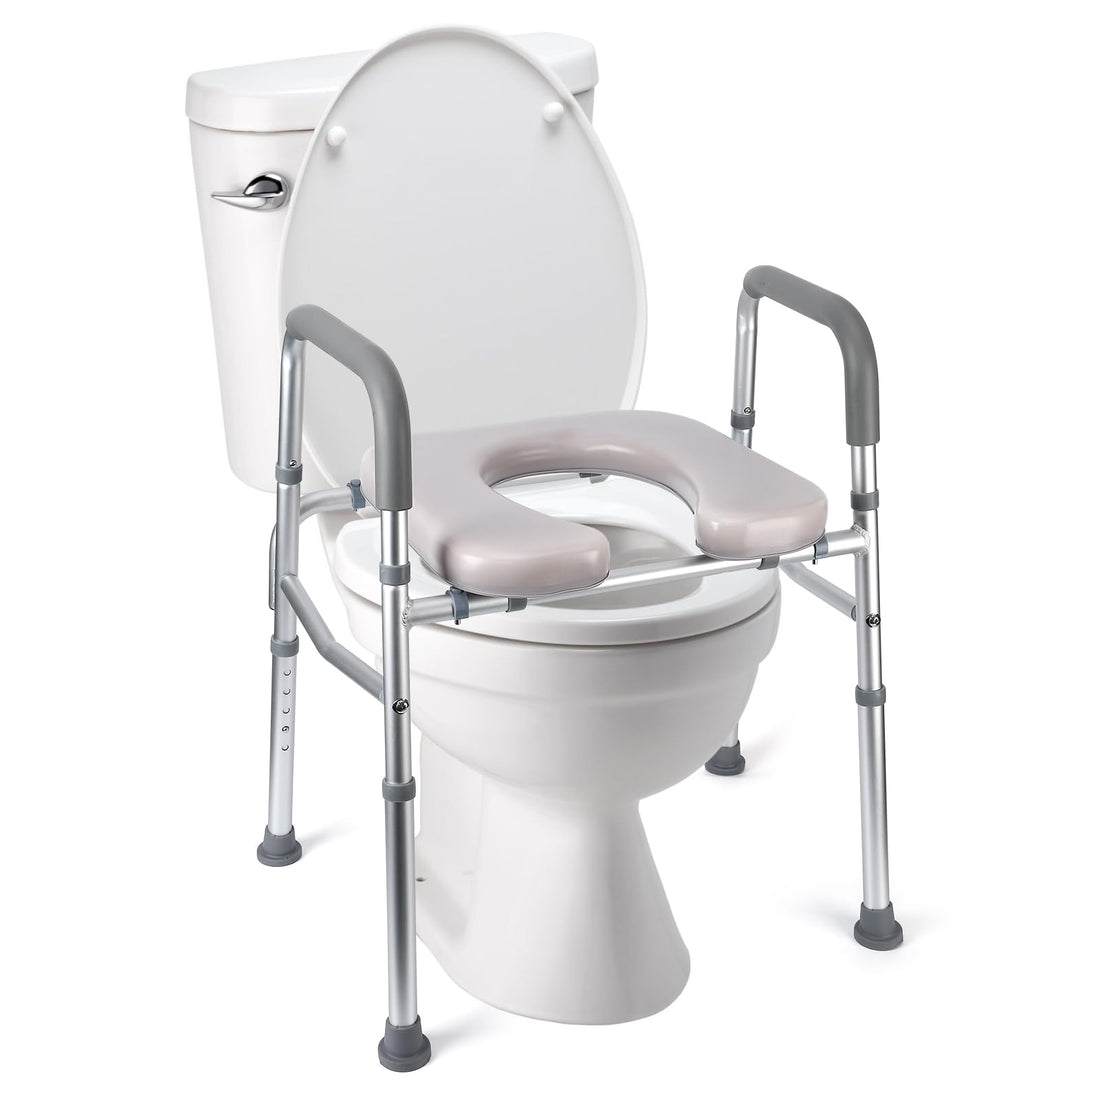 Raised Toilet Seat for Seniors, Safety Assist Shower Chair for Handicapped and Pregnant